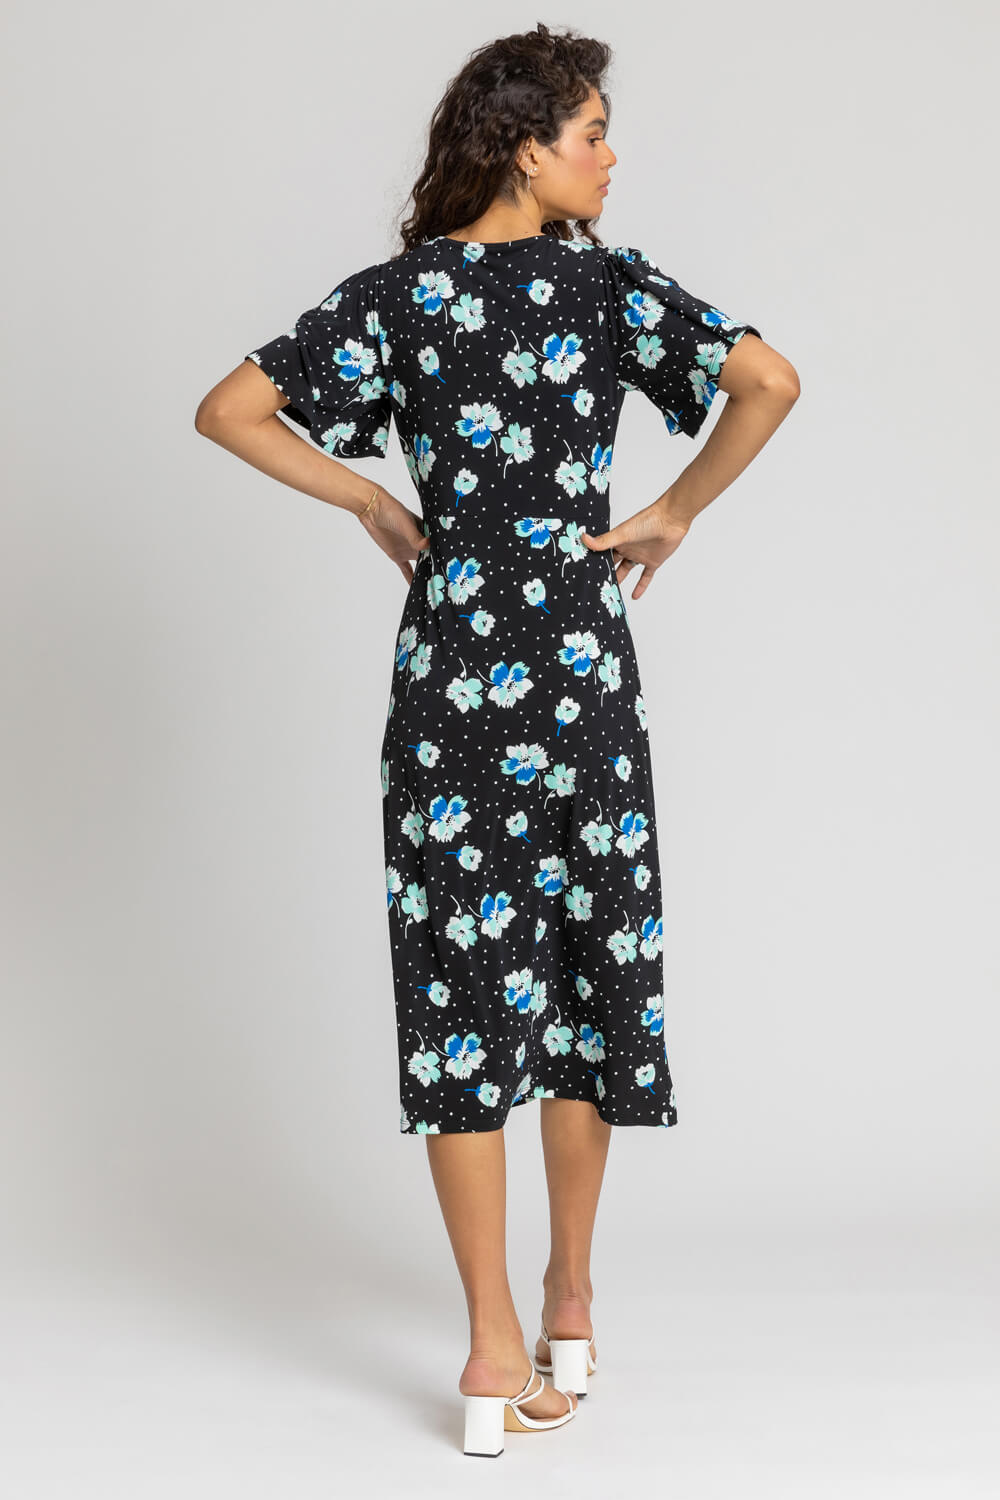 Black Spotted Floral Fit & Flare Midi Dress, Image 2 of 5